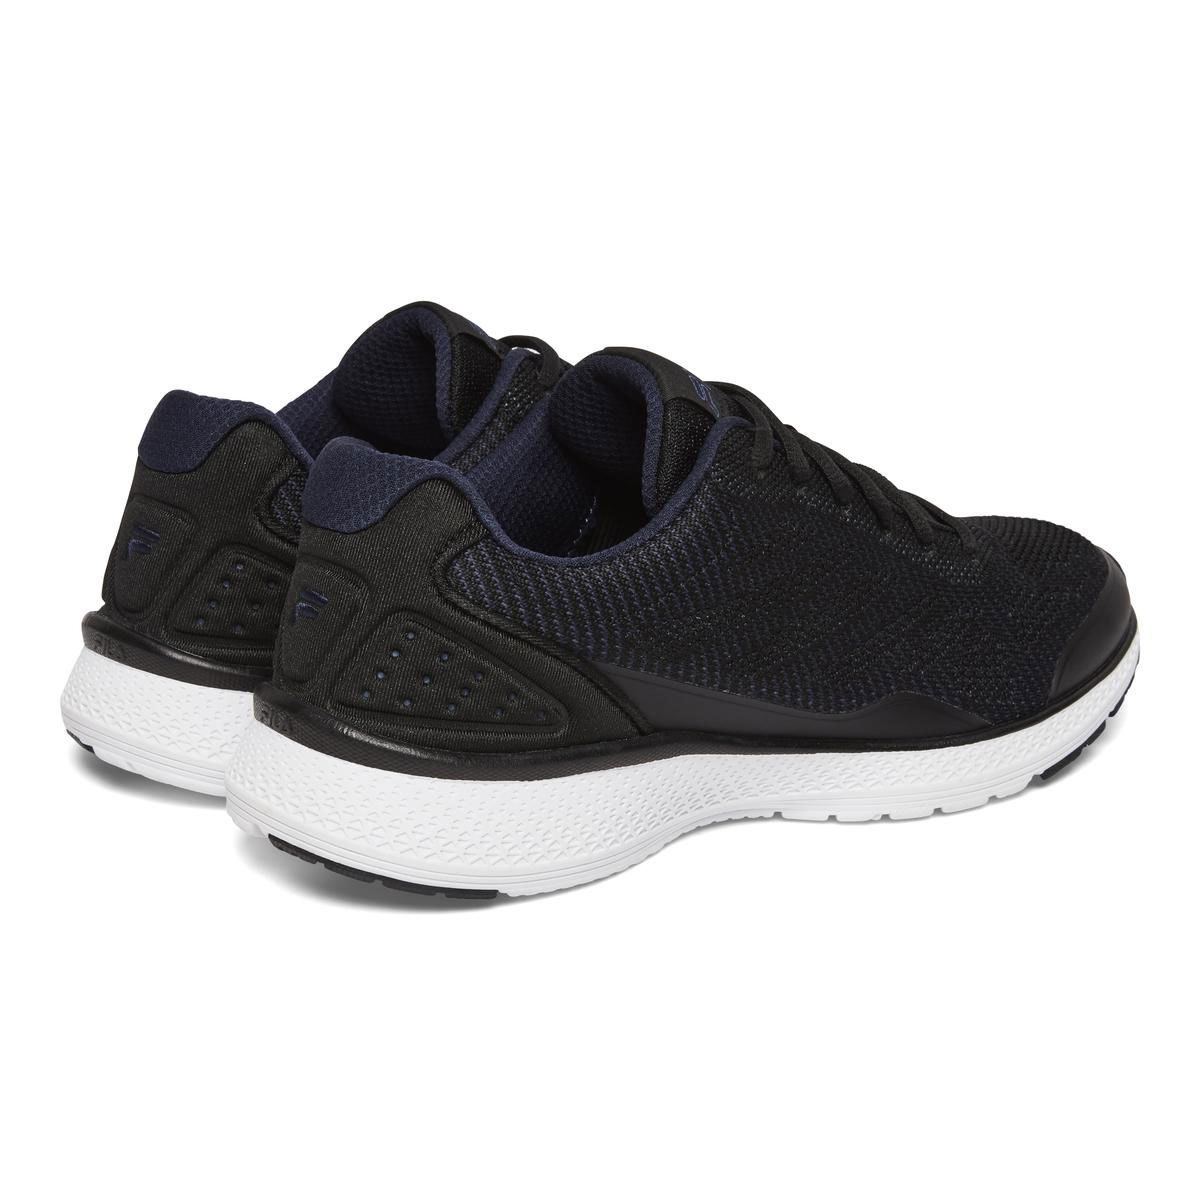 Fila Knit Athletic Men's Shoes Available in Black, Size 9.5 | Costco UK